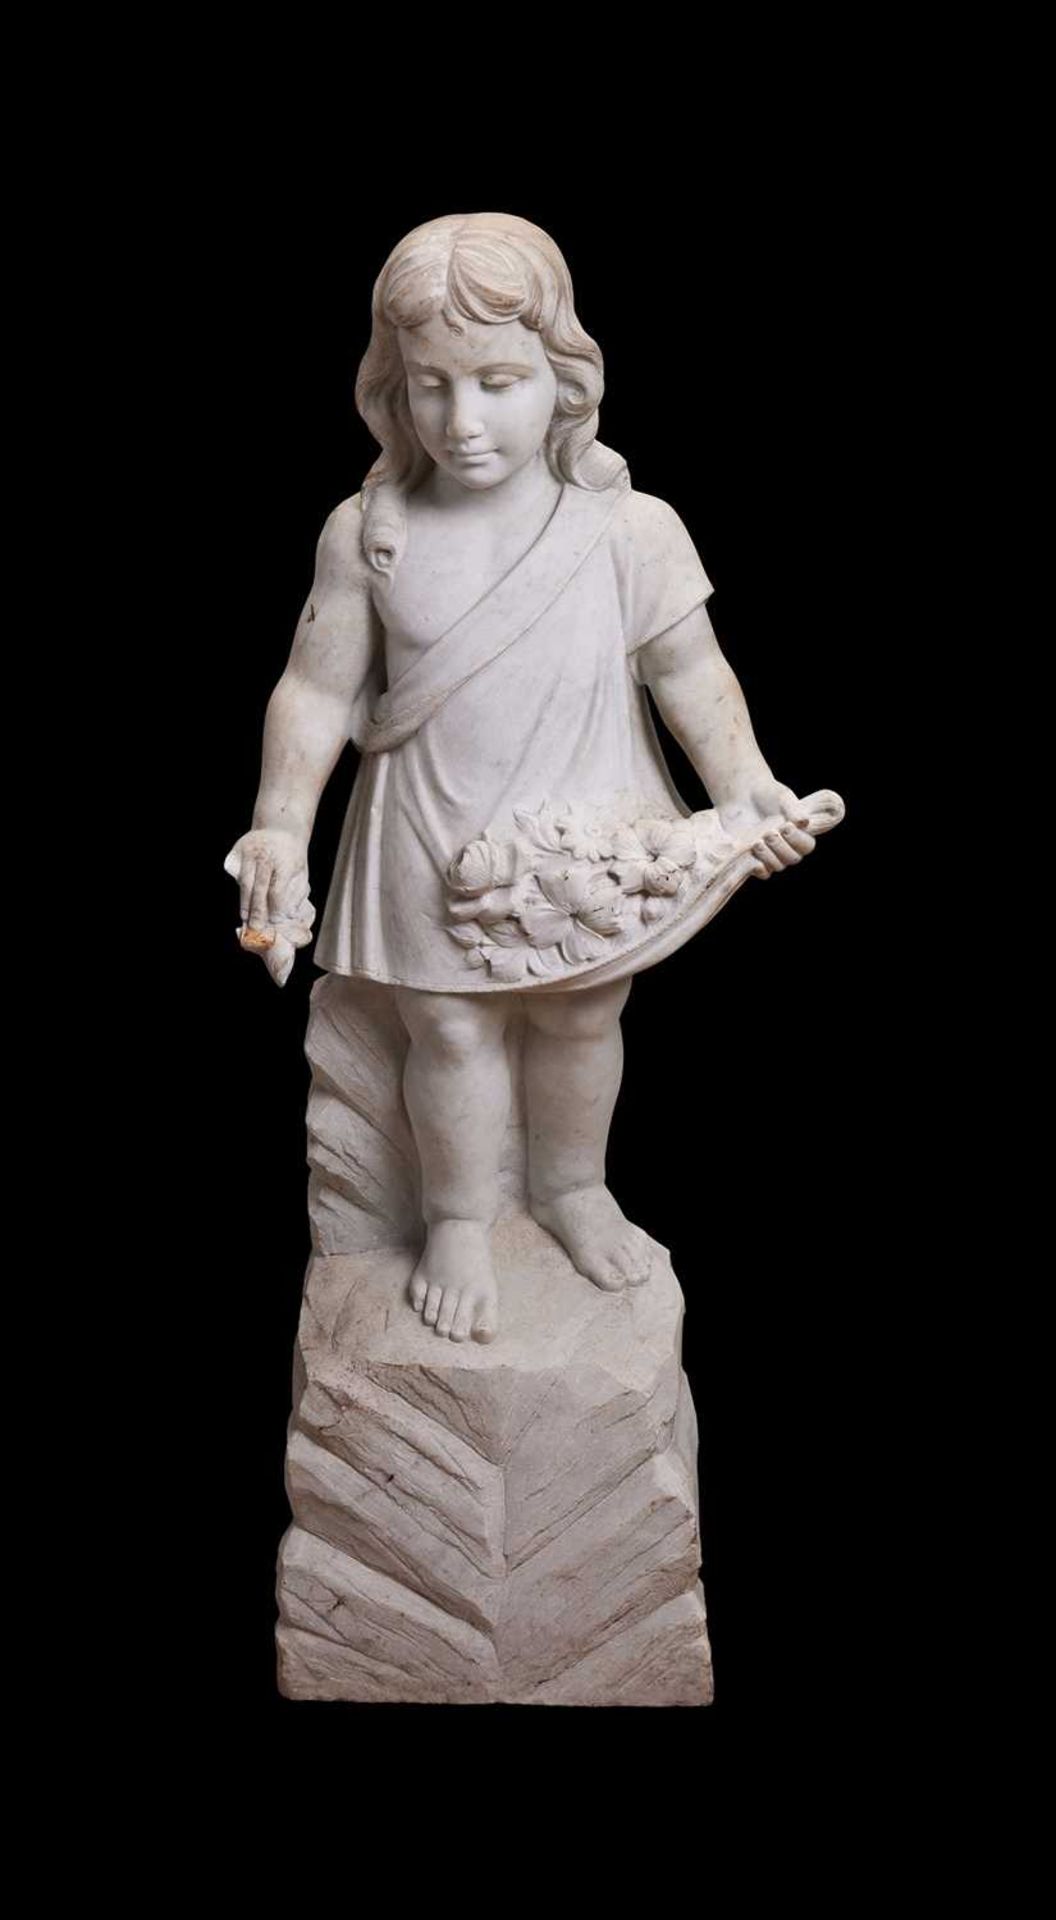 A MARBLE FIGURE OF A YOUNG GIRL WITH FLOWERS